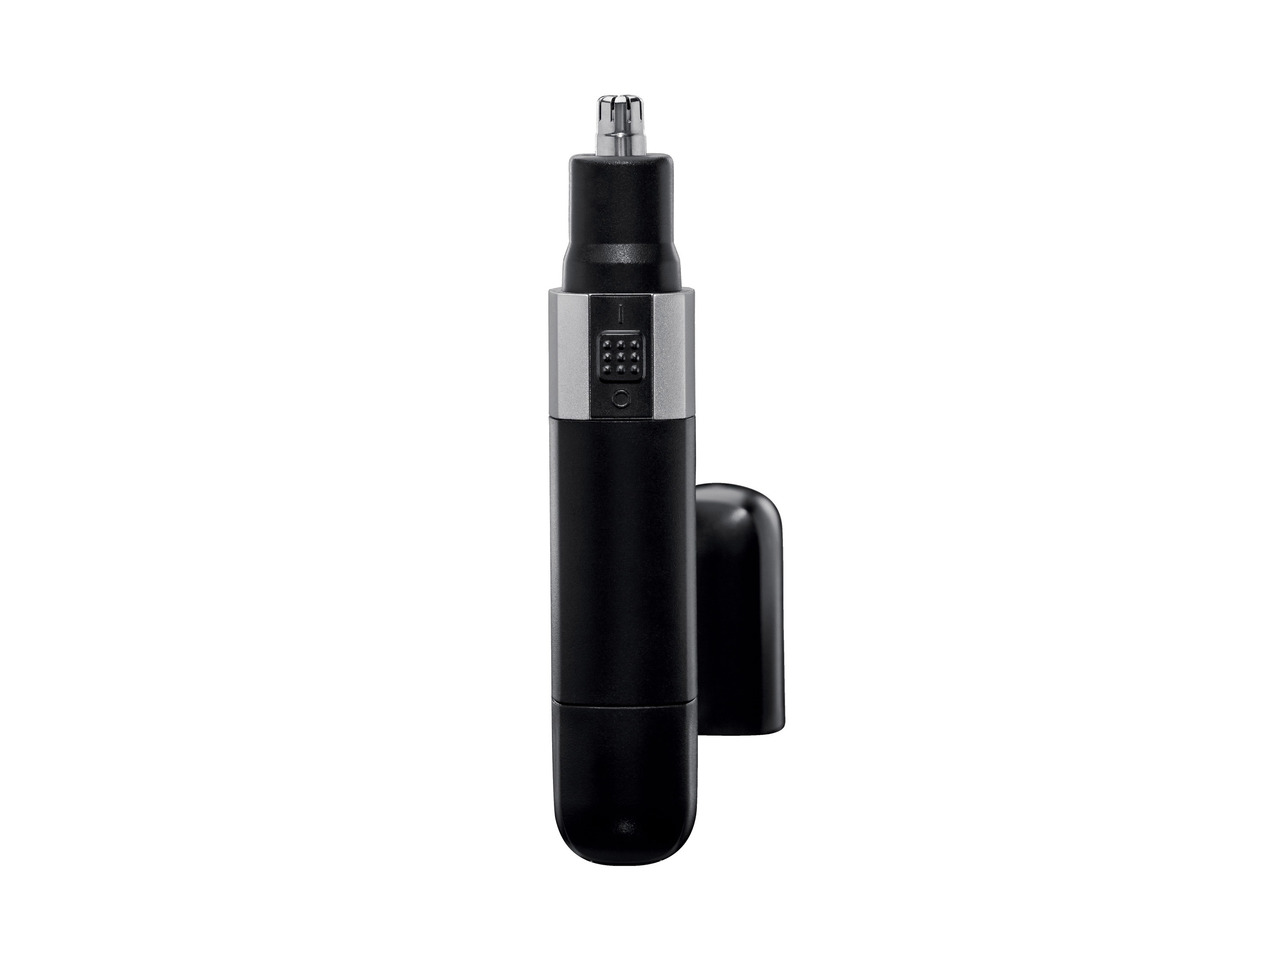 SILVERCREST PERSONAL CARE Nose & Ear Hair Trimmer